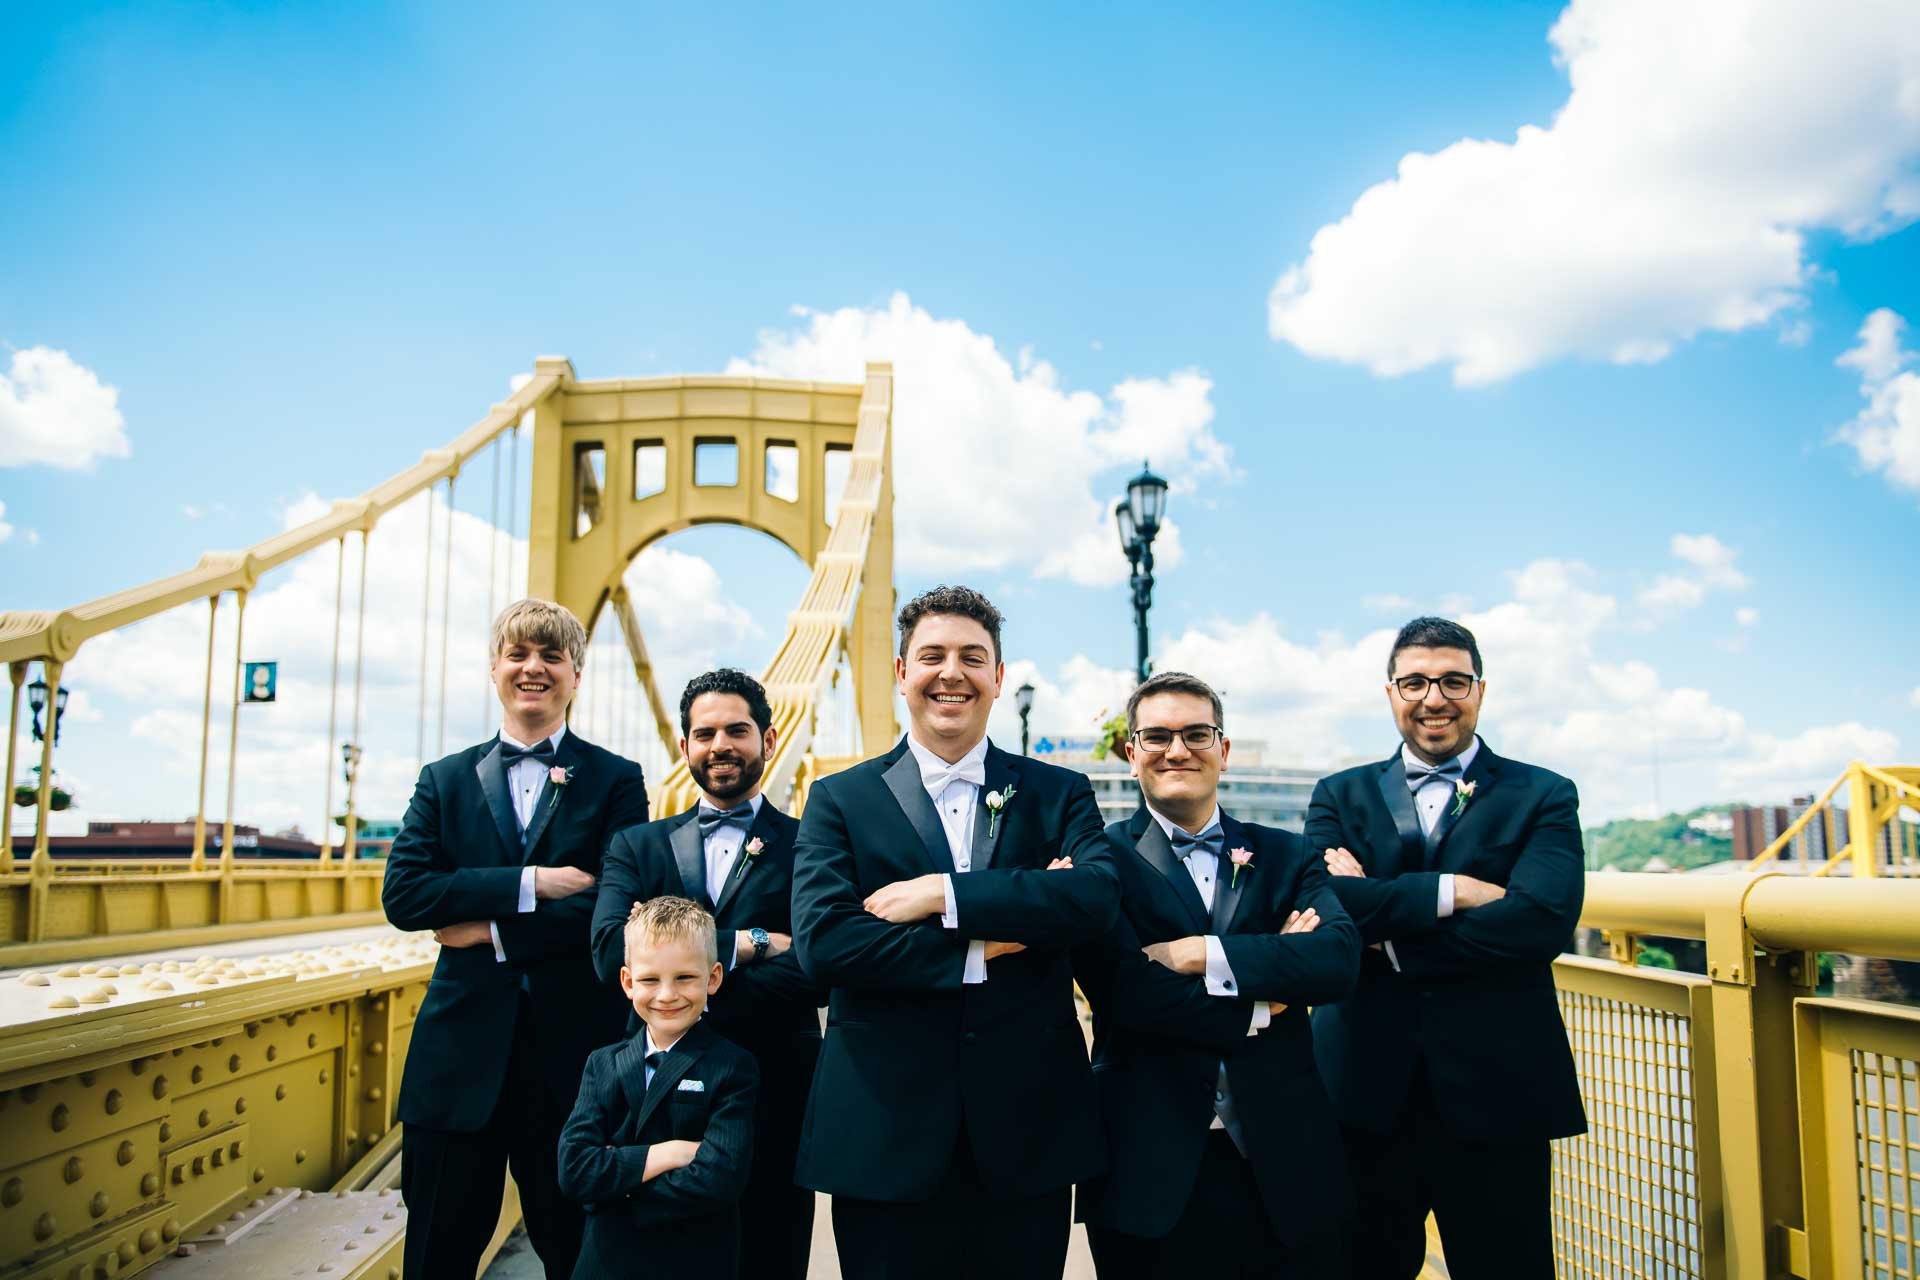 Downtown Pittsburgh Wedding Venues